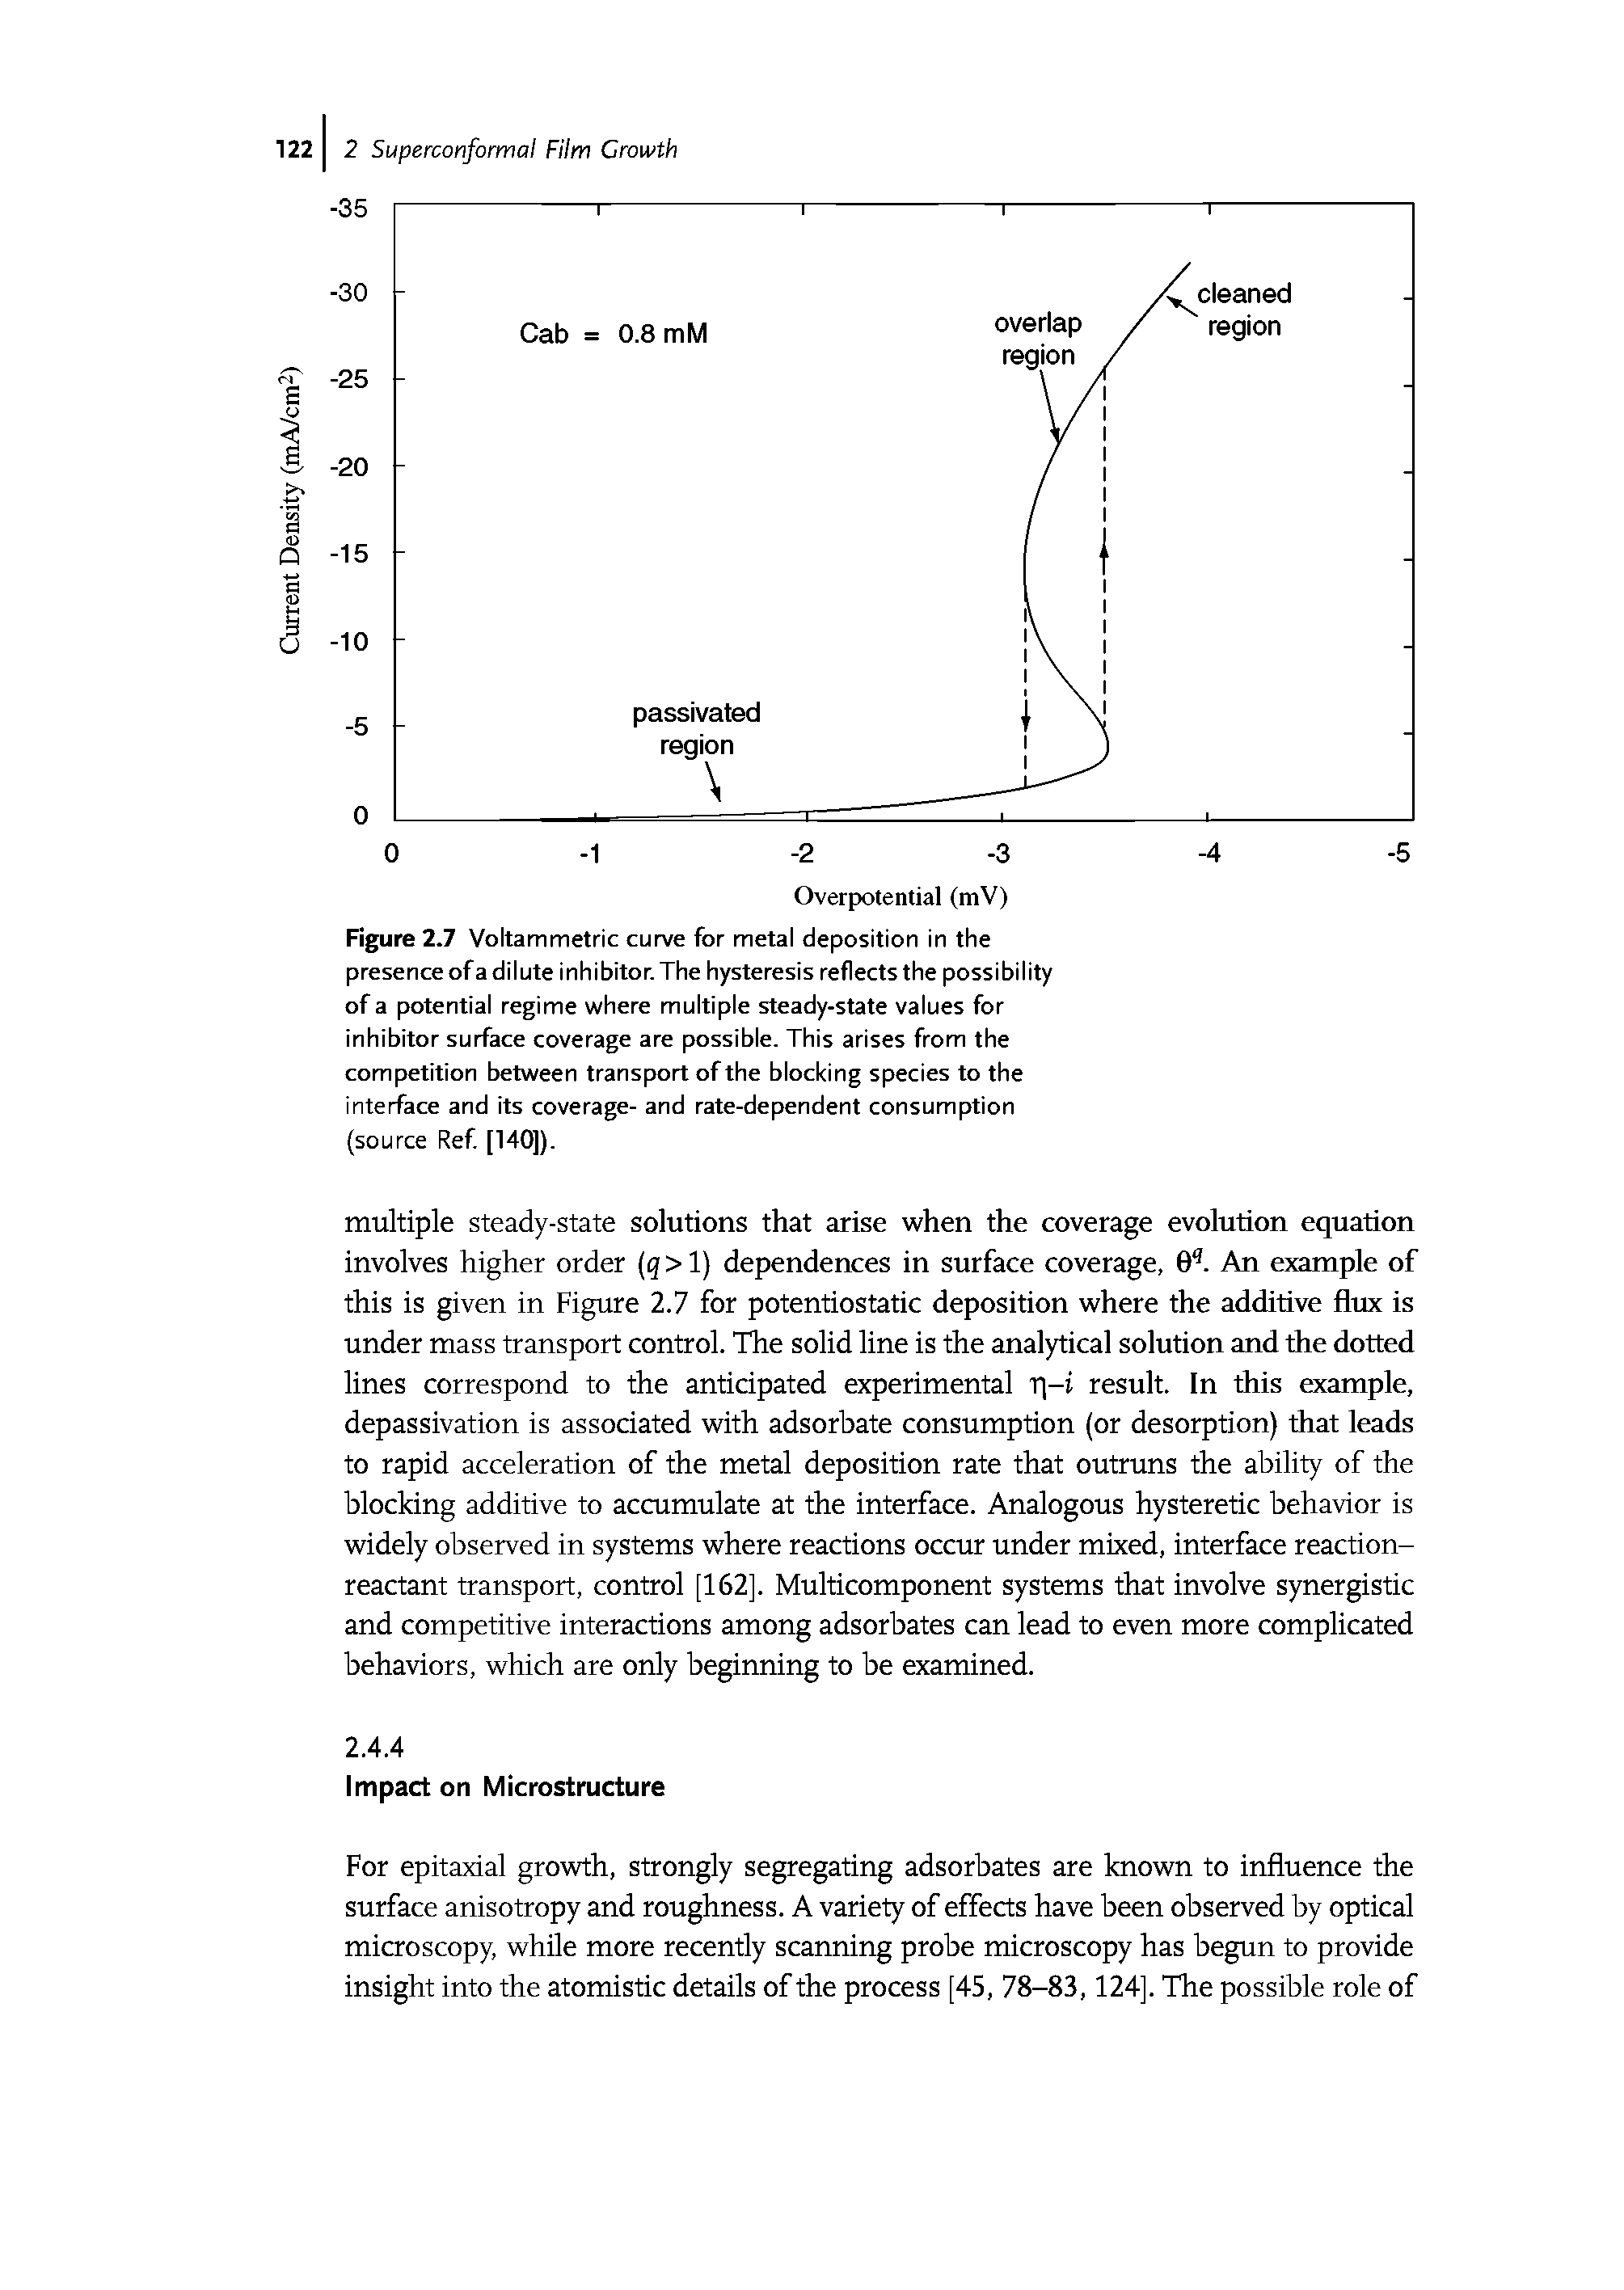 Figure 2.7 Voltammetric curve for metal deposition in the presence of a dilute inhibitor. The hysteresis reflects the possibility of a potential regime where multiple steady-state values for inhibitor surface coverage are possible. This arises from the competition between transport of the blocking species to the interface and its coverage- and rate-dependent consumption (source Ref. [140]).